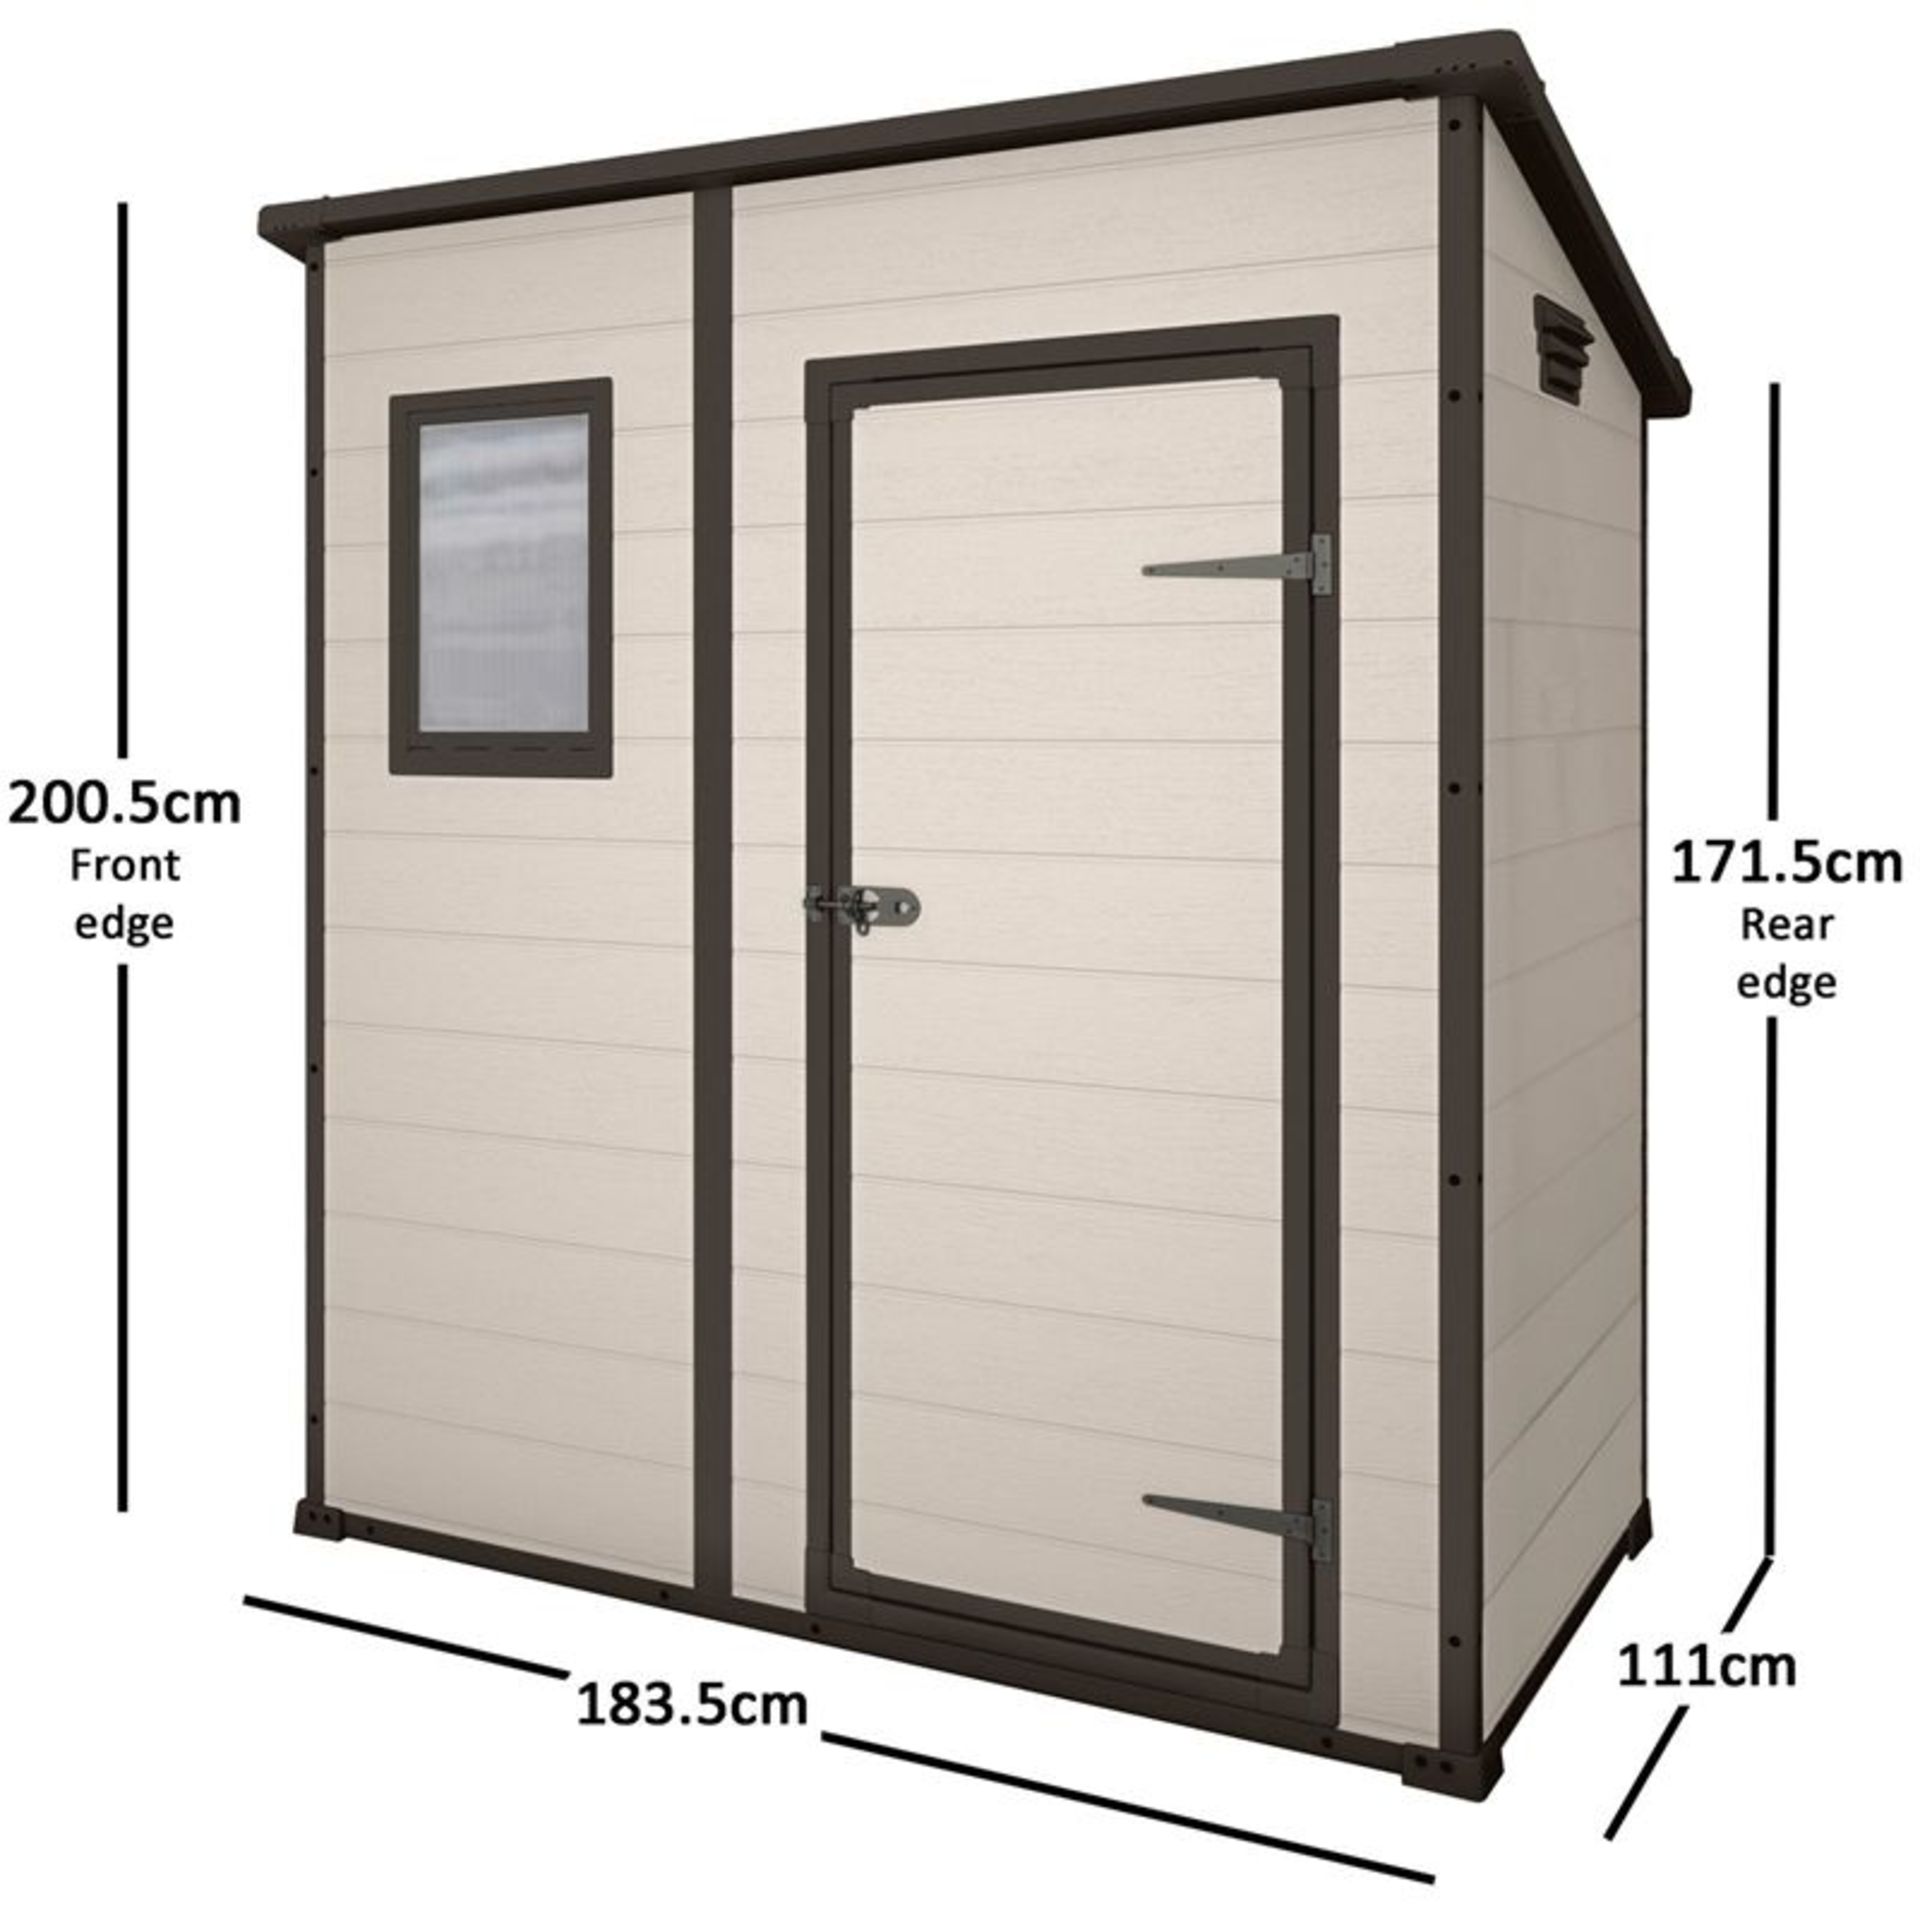 (R16) 1x Keter Manor Pent Garden Storage Shed 6x4 Beige Brown RRP £350 (Box Open – Unsure If Comple - Image 2 of 5